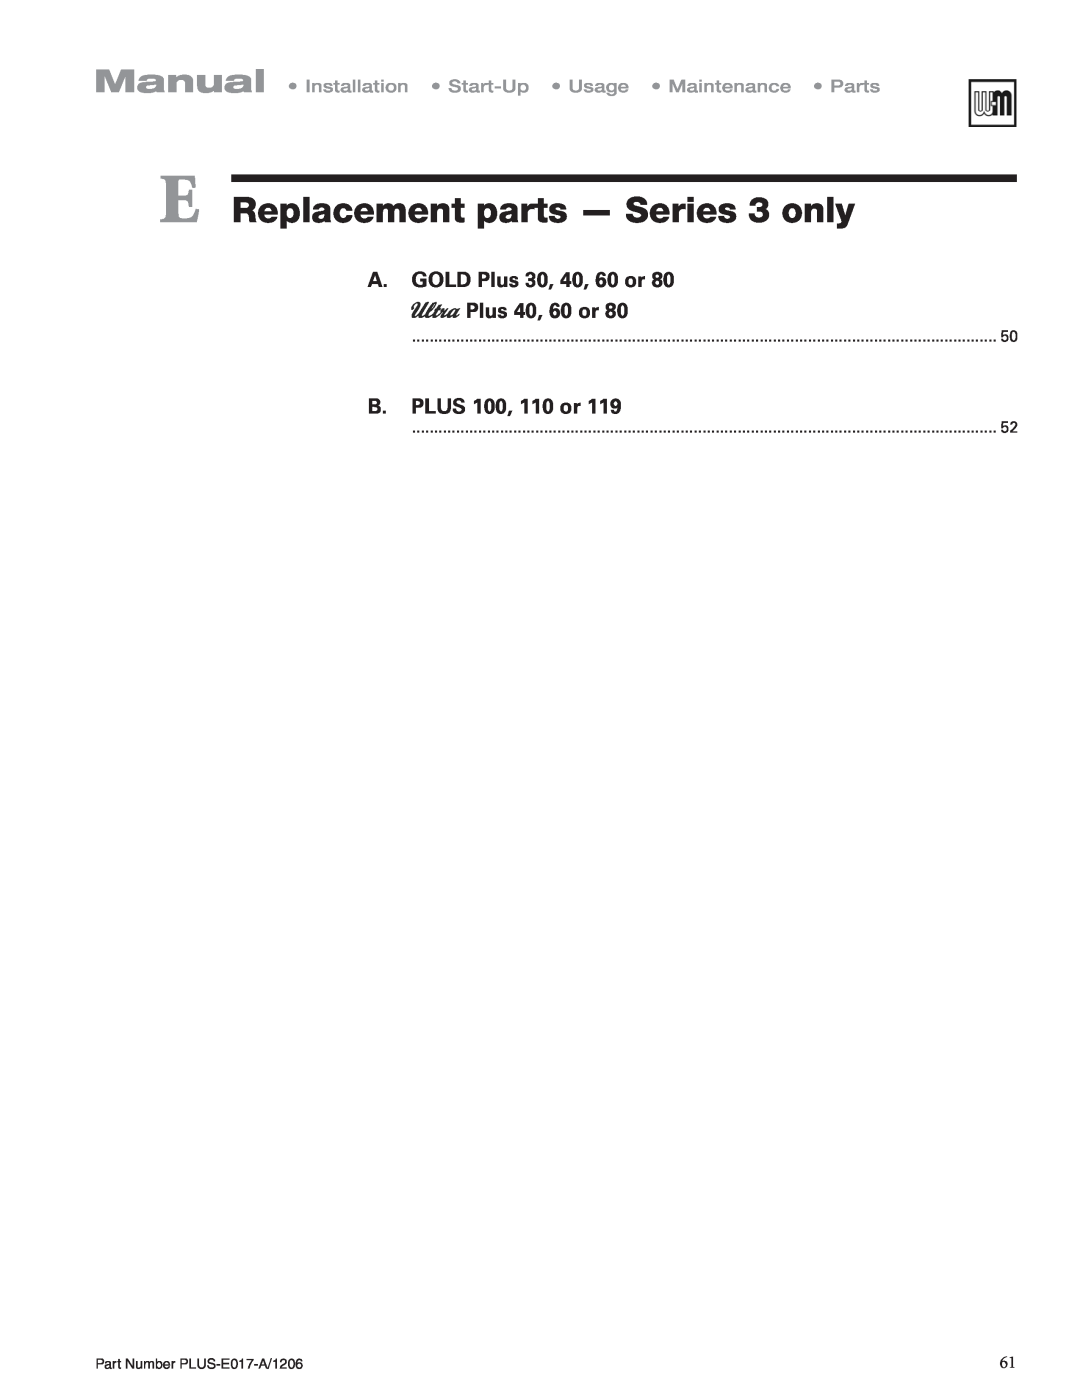 Weil-McLain PLUS-E017-A/1206 manual E Replacement parts - Series 3 only, A.GOLD Plus 30, 40, 60 or Plus 40, 60 or 